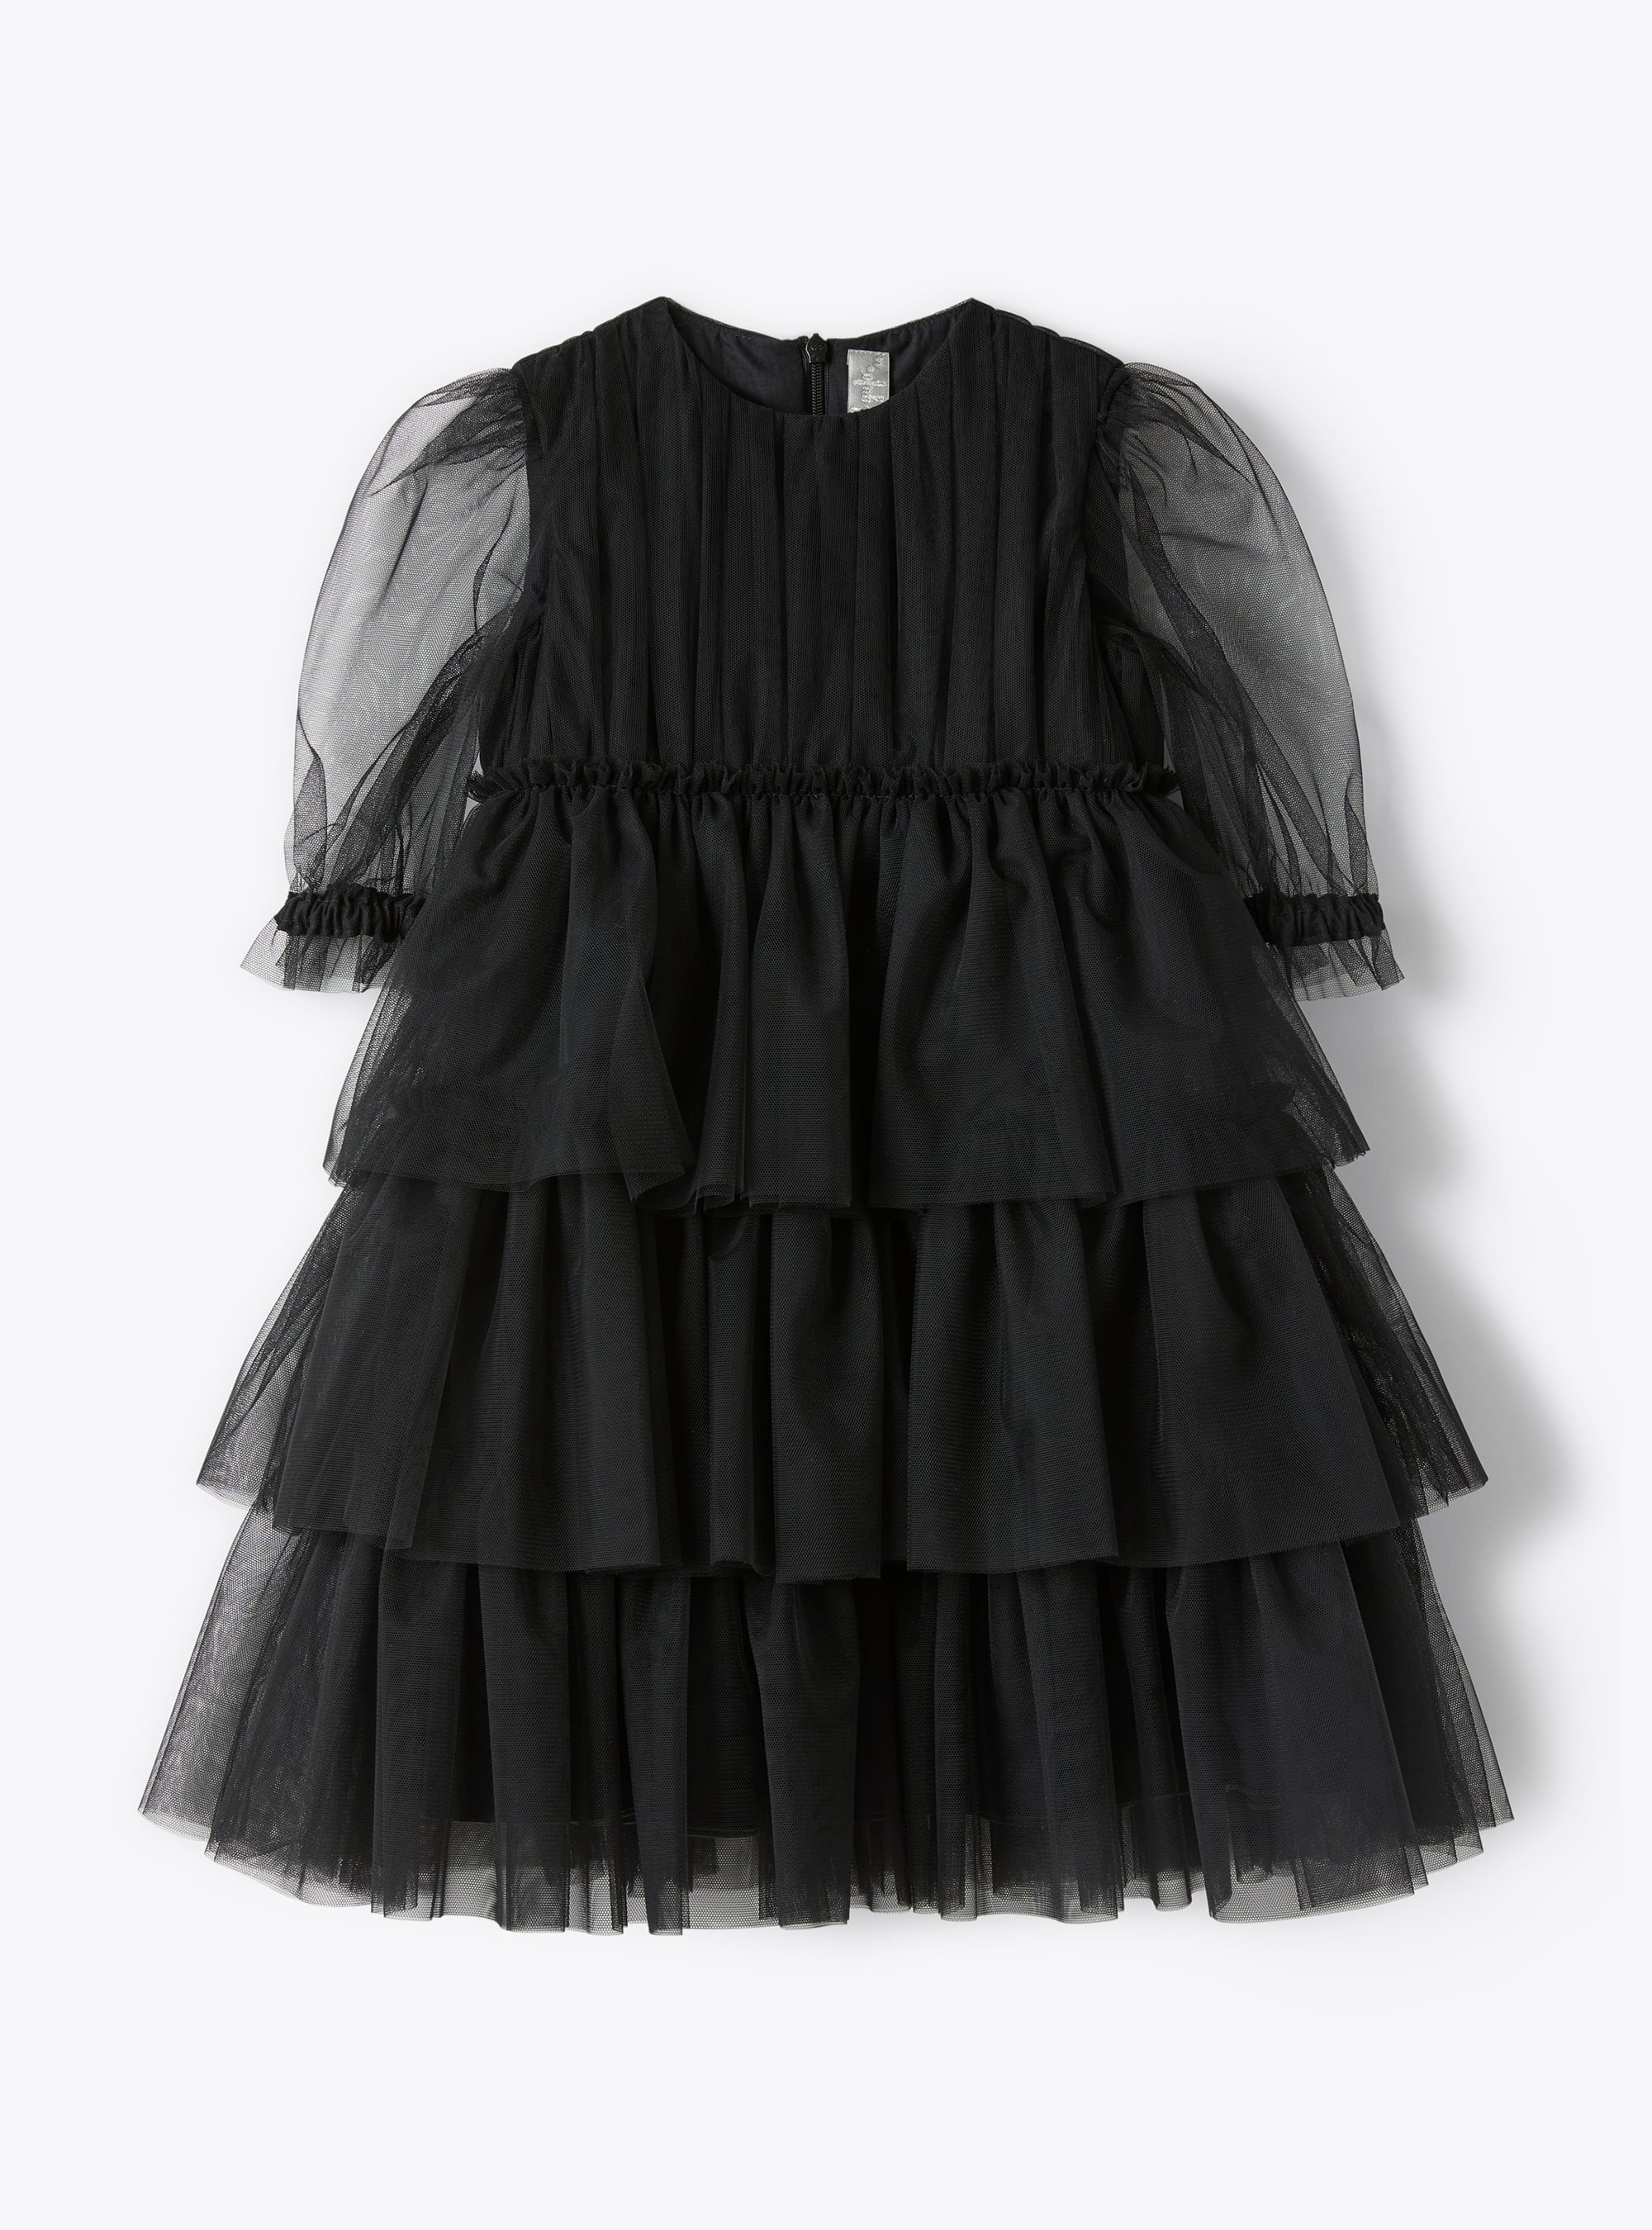 Tiered dress in black tulle - Dresses - Il Gufo